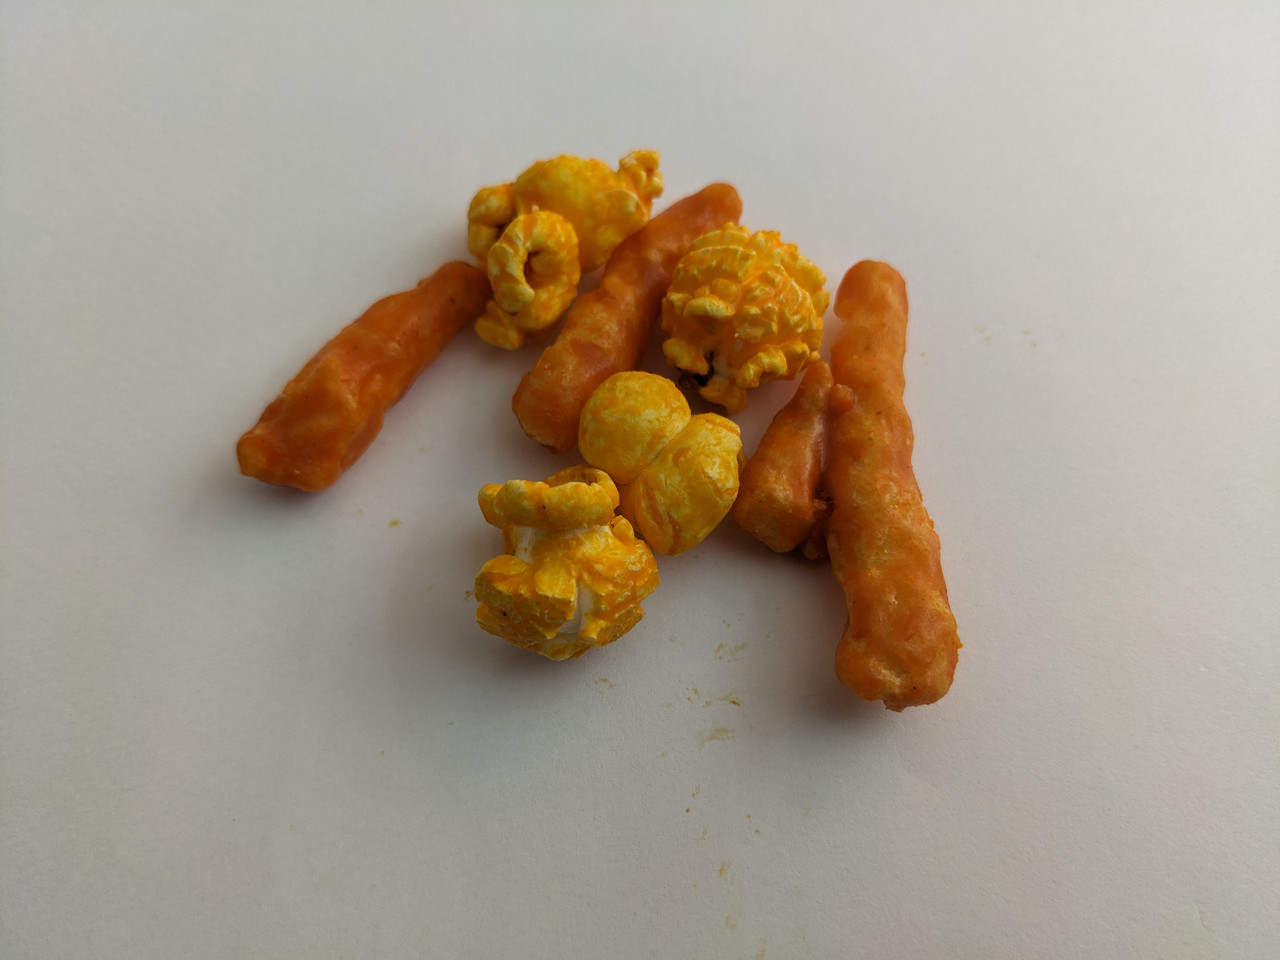 Cheetos Caramel Popcorn - Imported From Brazil To Canada!